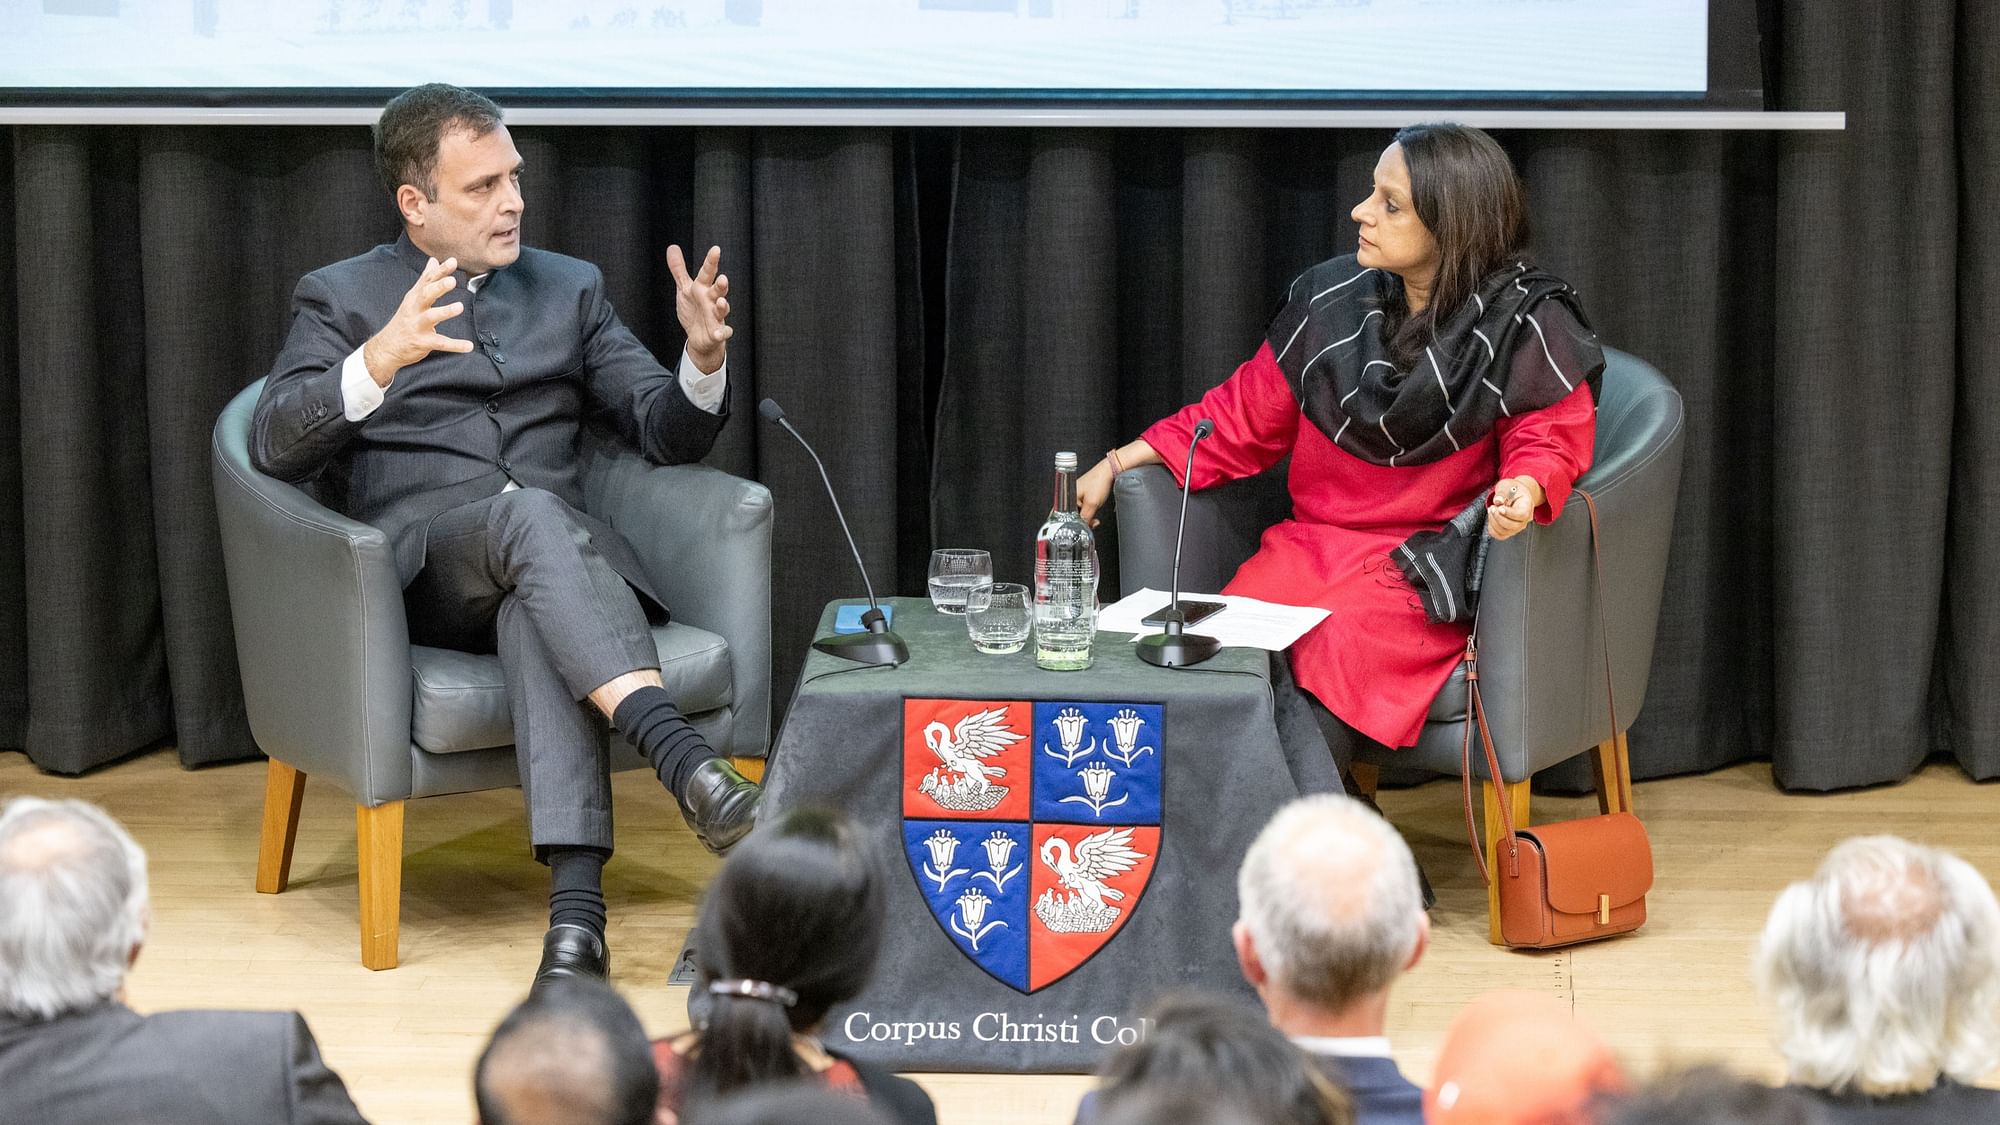 <div class="paragraphs"><p>Congress leader <a href="https://www.thequint.com/topic/rahul-gandhi">Rahul Gandhi</a> expressed concern about the one organisation 'capturing' the Indian state and media as he addressed students at Cambridge University's Corpus Christi College on Monday, 23 May.</p></div>